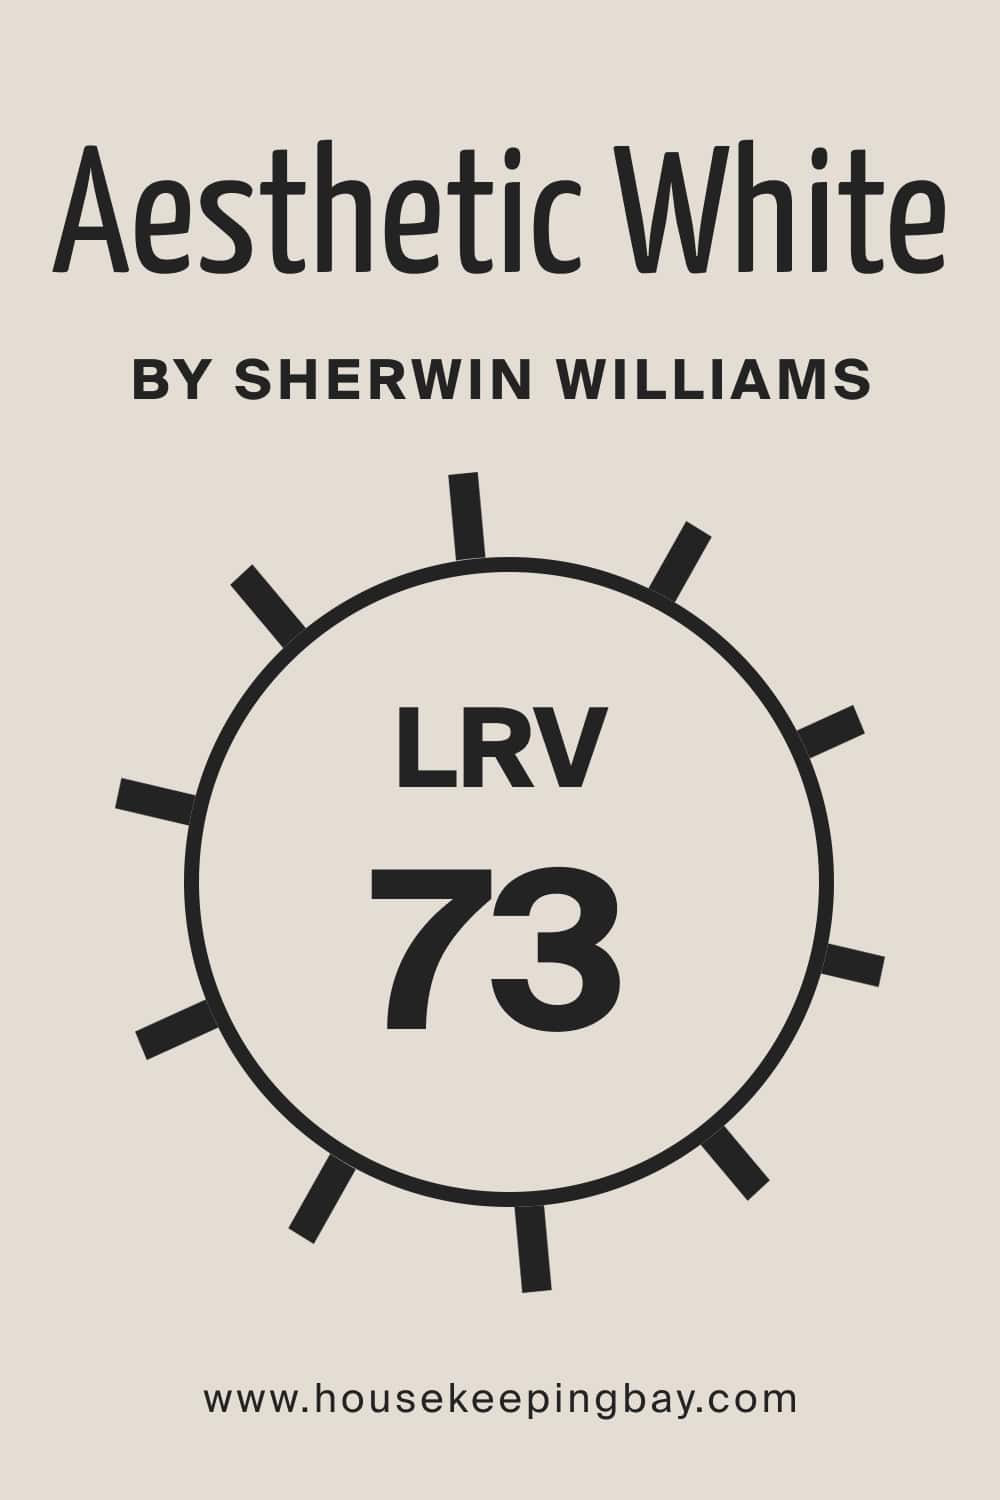 Aesthetic White SW 7035 by Sherwin Williams. LRV – 73